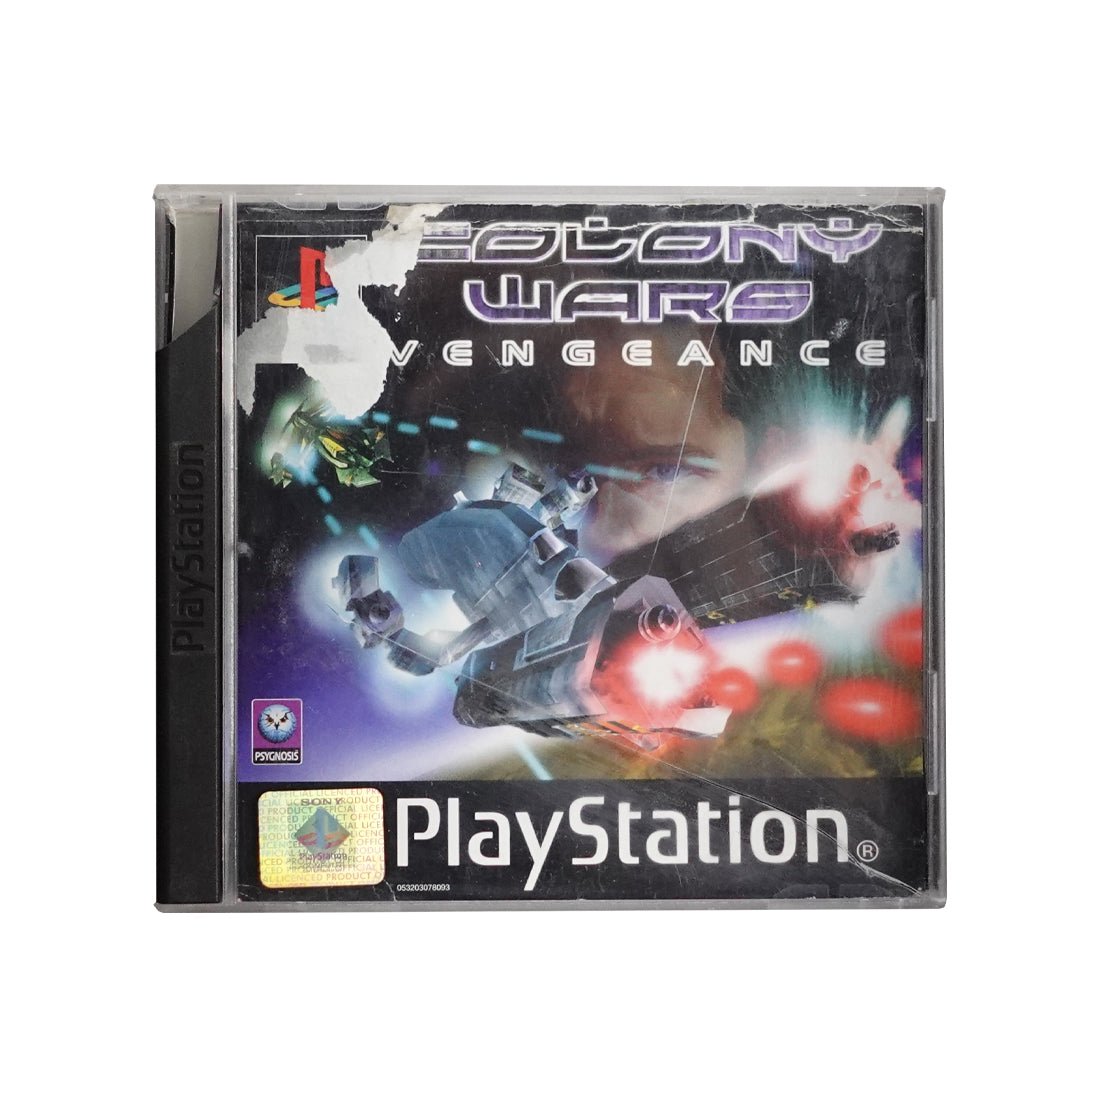 (Pre-Owned) Colony Wars Vengeance - PlayStation 1 - Store 974 | ستور ٩٧٤